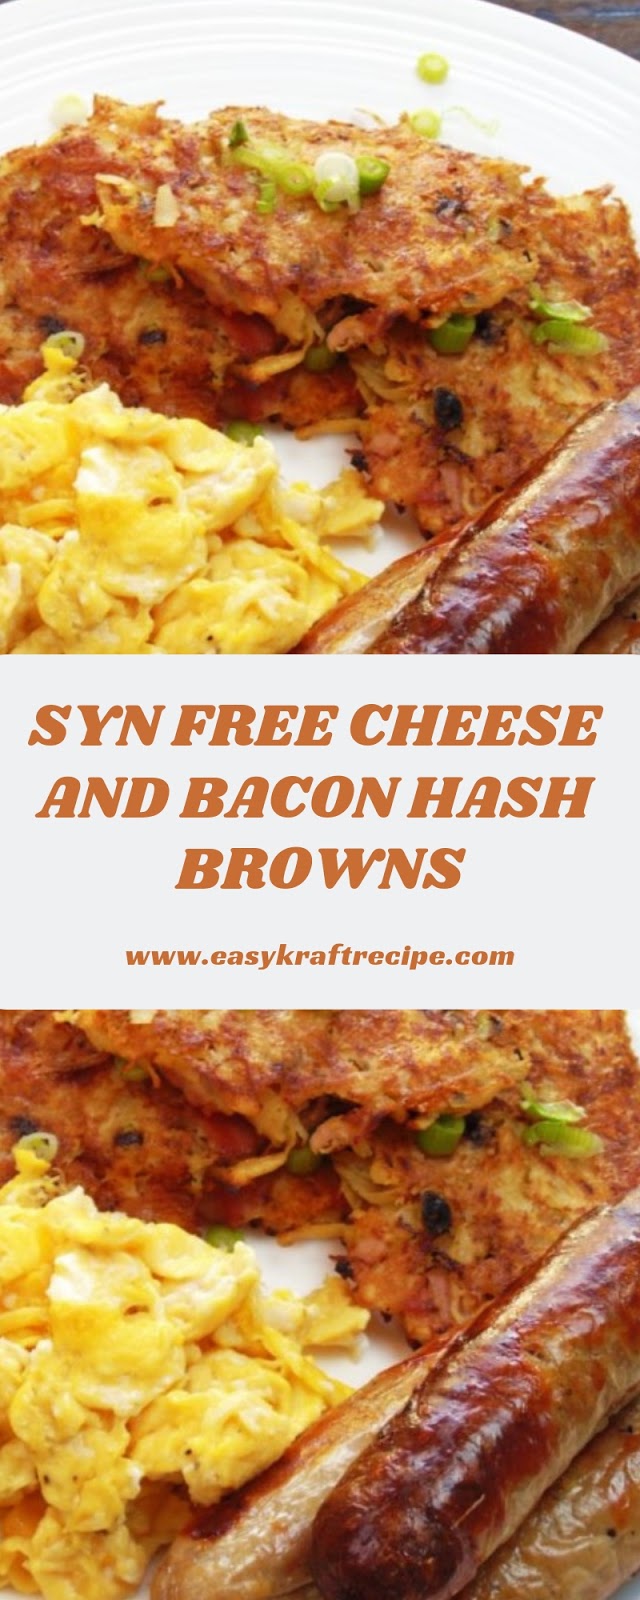 SYN FREE CHEESE AND BACON HASH BROWNS